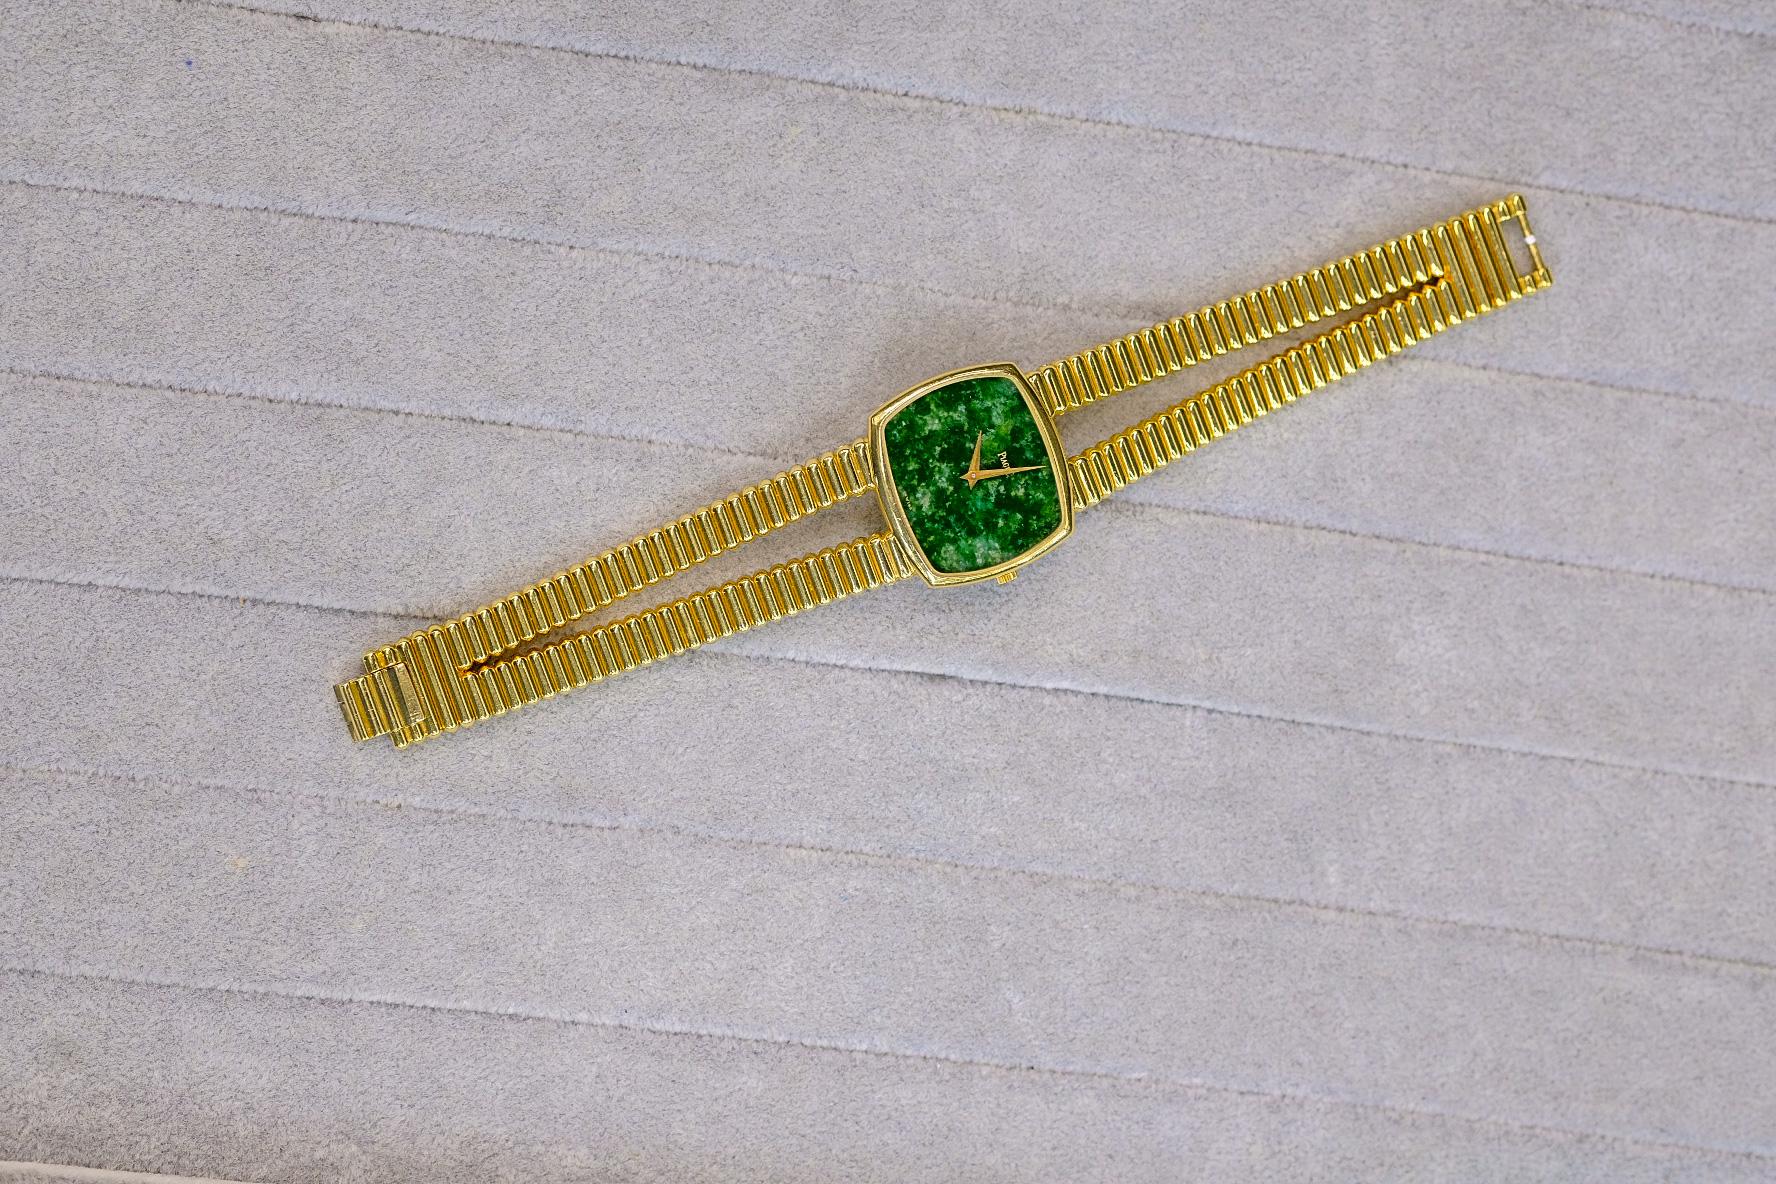 Piaget 18K Yellow Gold 1970's Vintage Ref 9731 Mechanical Wrist Watch.

Exceptional and rare this vintage 18k yellow gold watch from 1970's is a beauty of Piaget. Can be worn by men or women, it is so classy. Swiss movement. Mechanical.

We